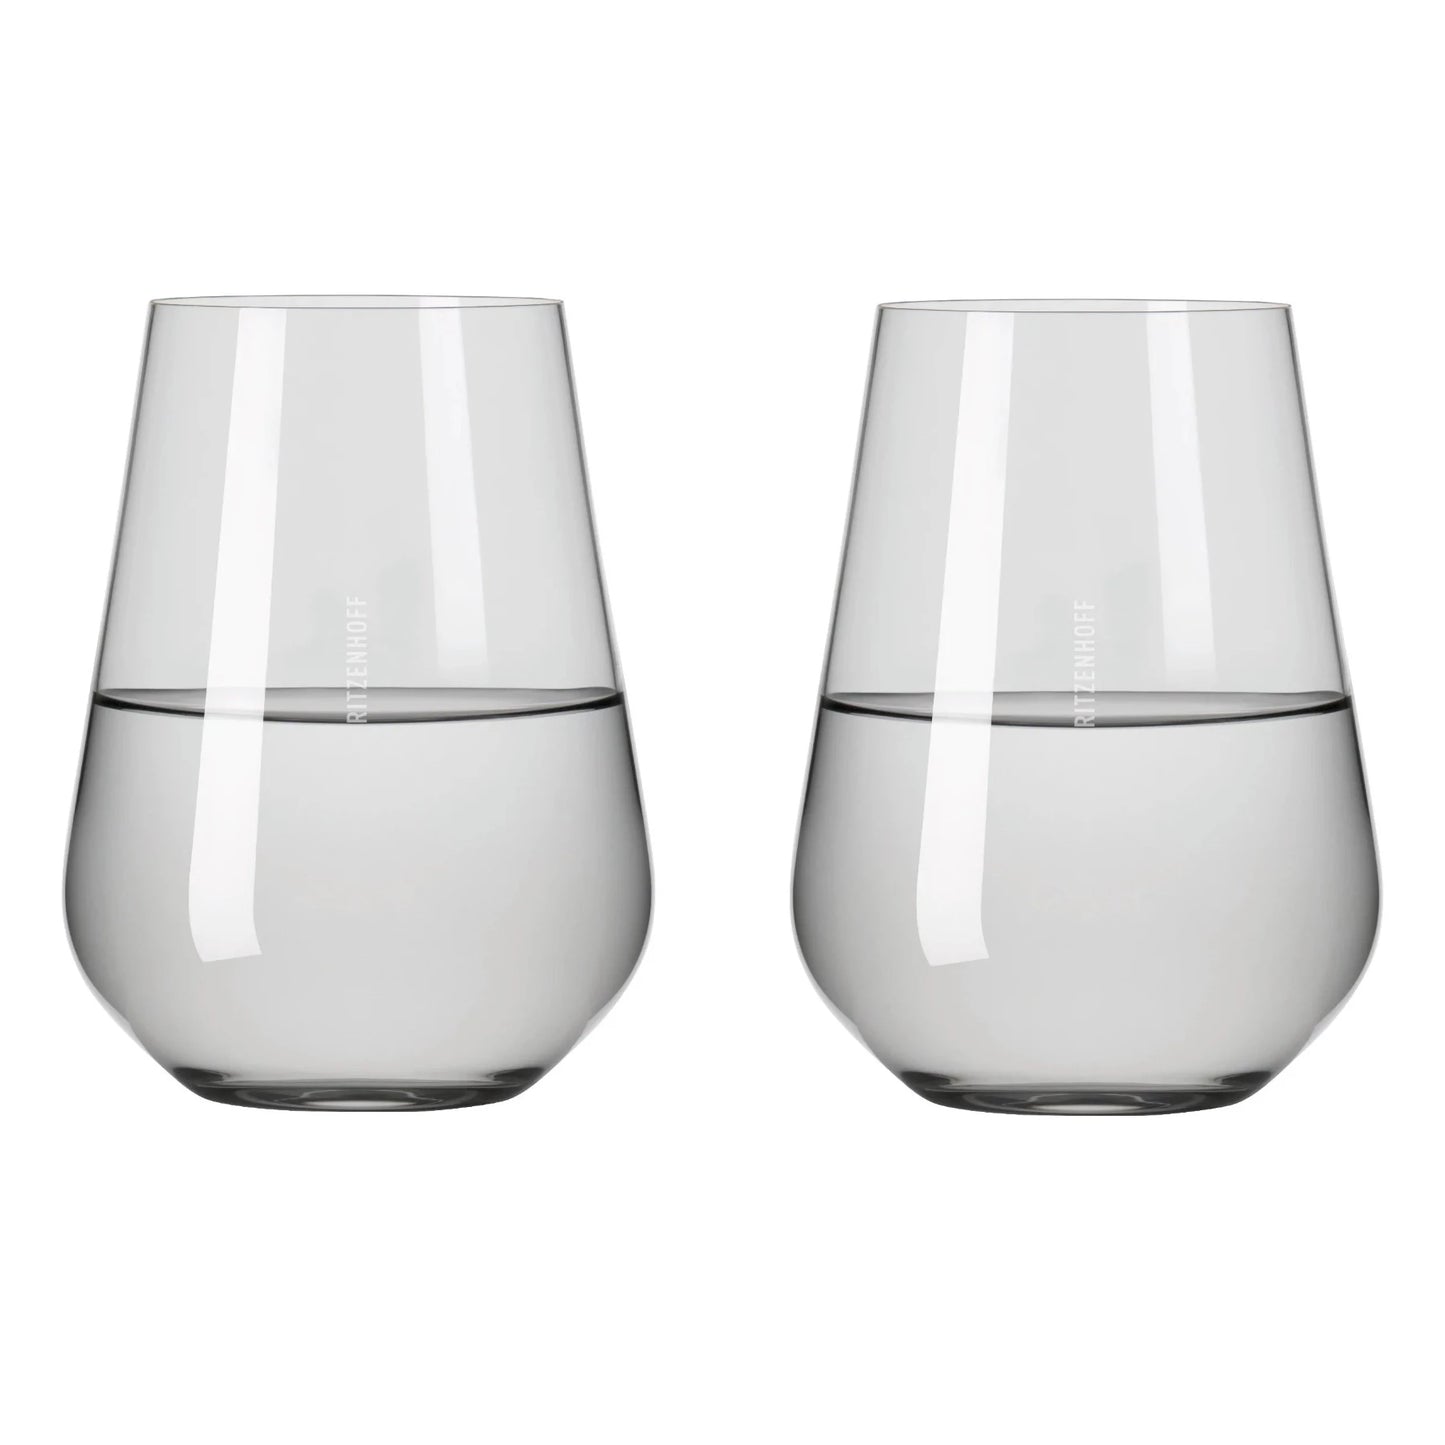 Fjord Light Water Glass,Grey, Set of 2